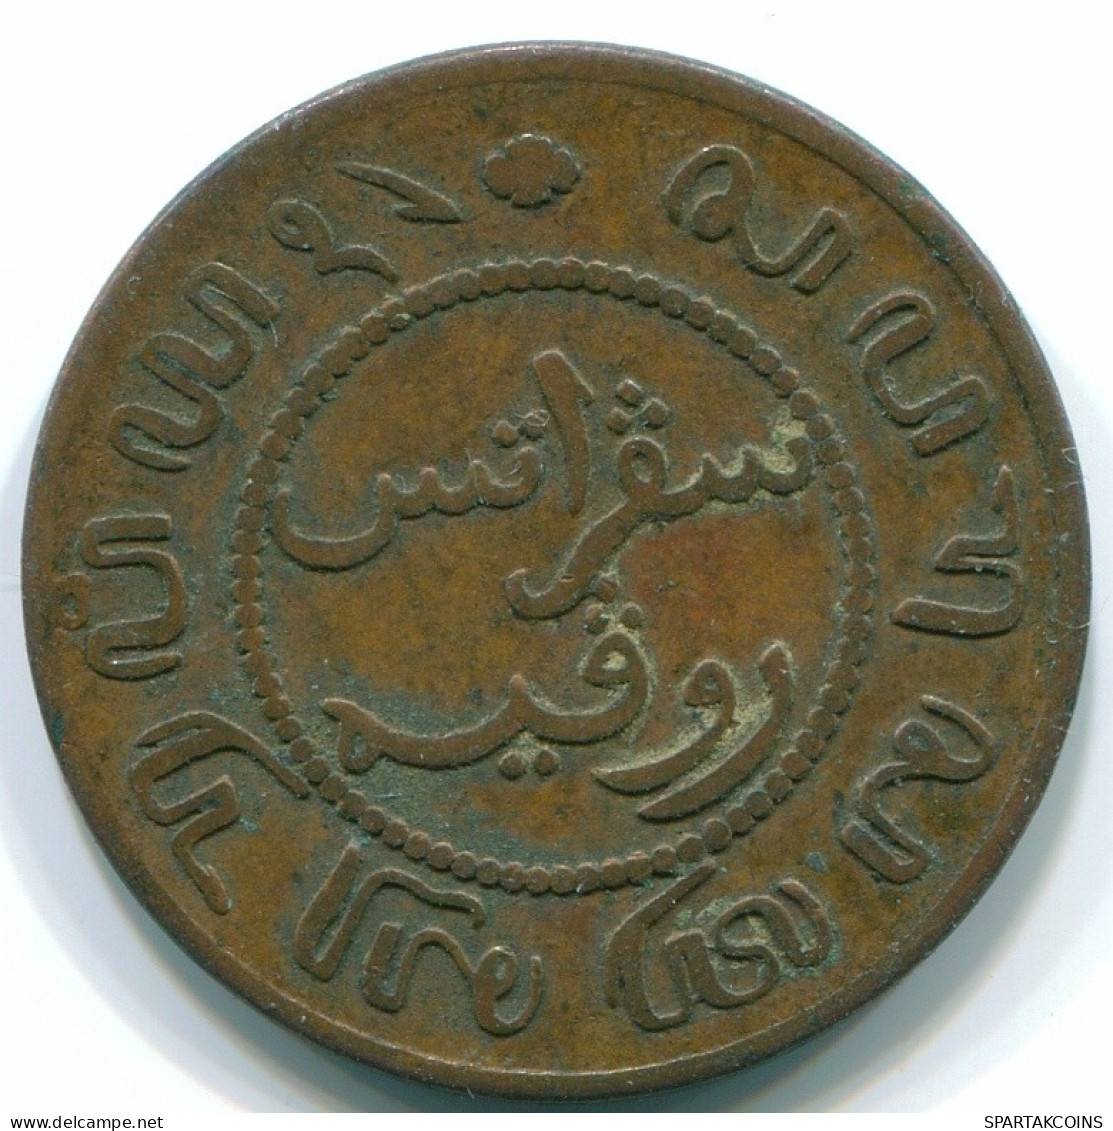 1 CENT 1857 NETHERLANDS EAST INDIES INDONESIA Copper Colonial Coin #S10033.U.A - Indes Néerlandaises